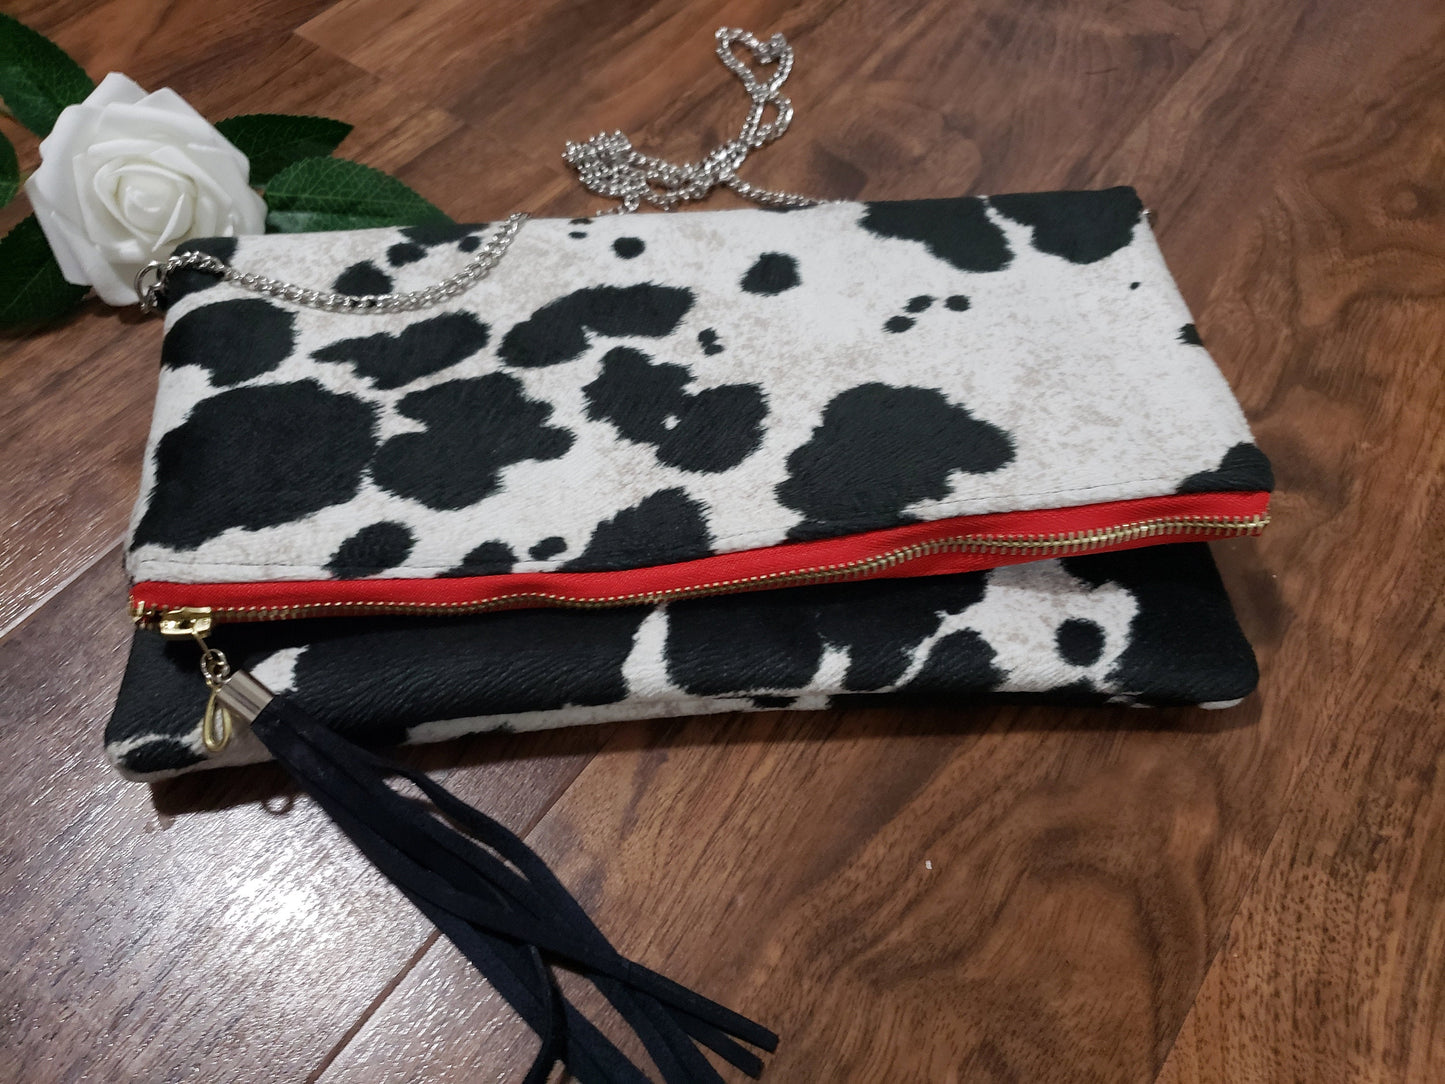 Cowhide Suede foldover clutch purse, cow print, gift for her,  Christmas, bridesmaid gift, Ankara lining, inside pocket, silver chain strap